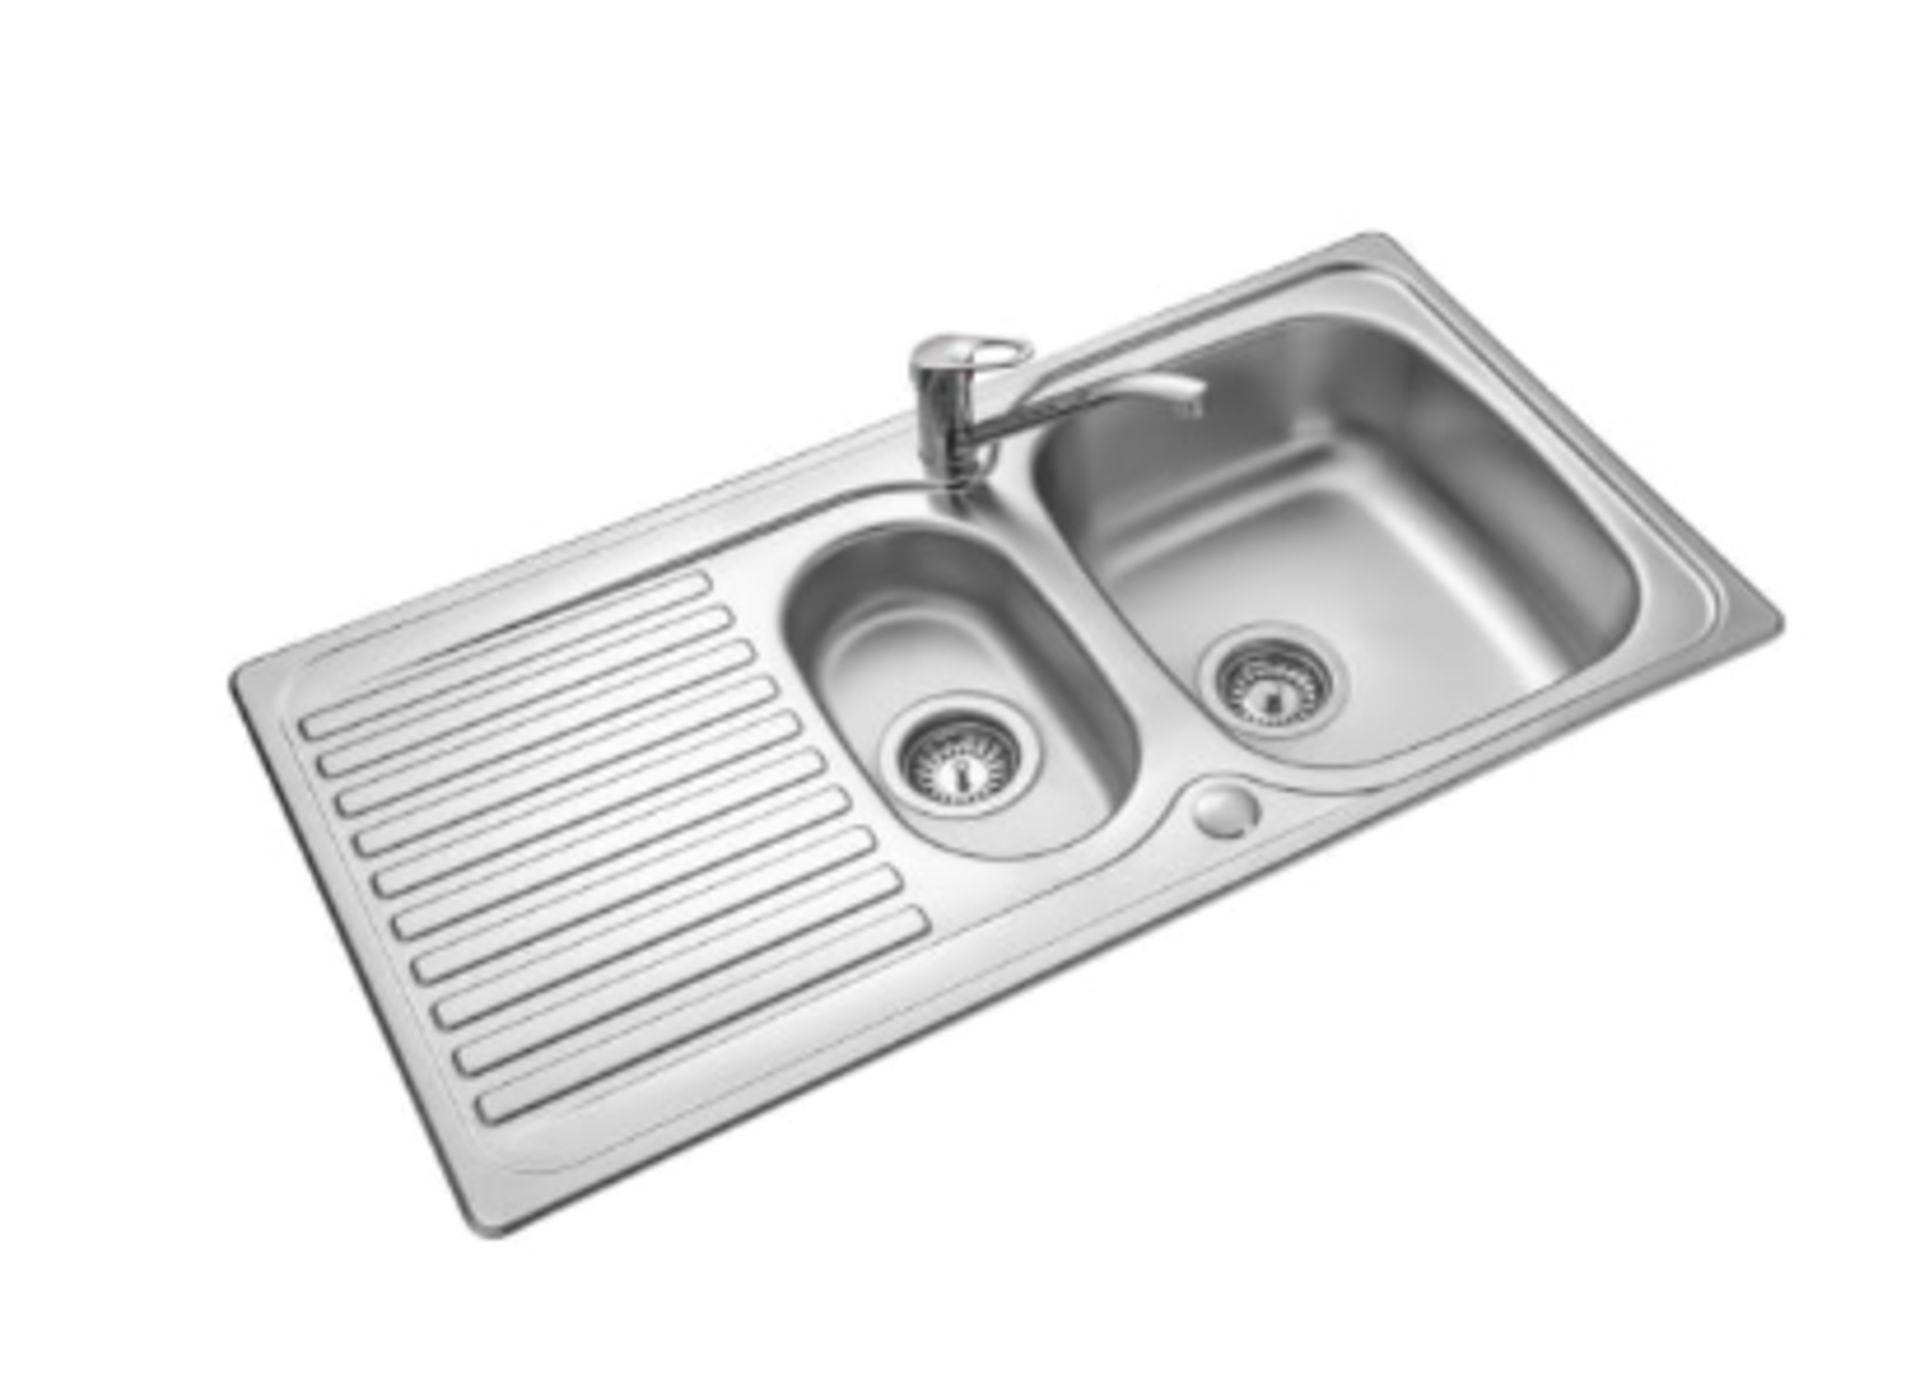 LINEAR 1.5 BOWL REVERSIBLE SINK 950 X 508MM AND SINGLE LEVER TAP PACK RRP £129 - Image 2 of 2